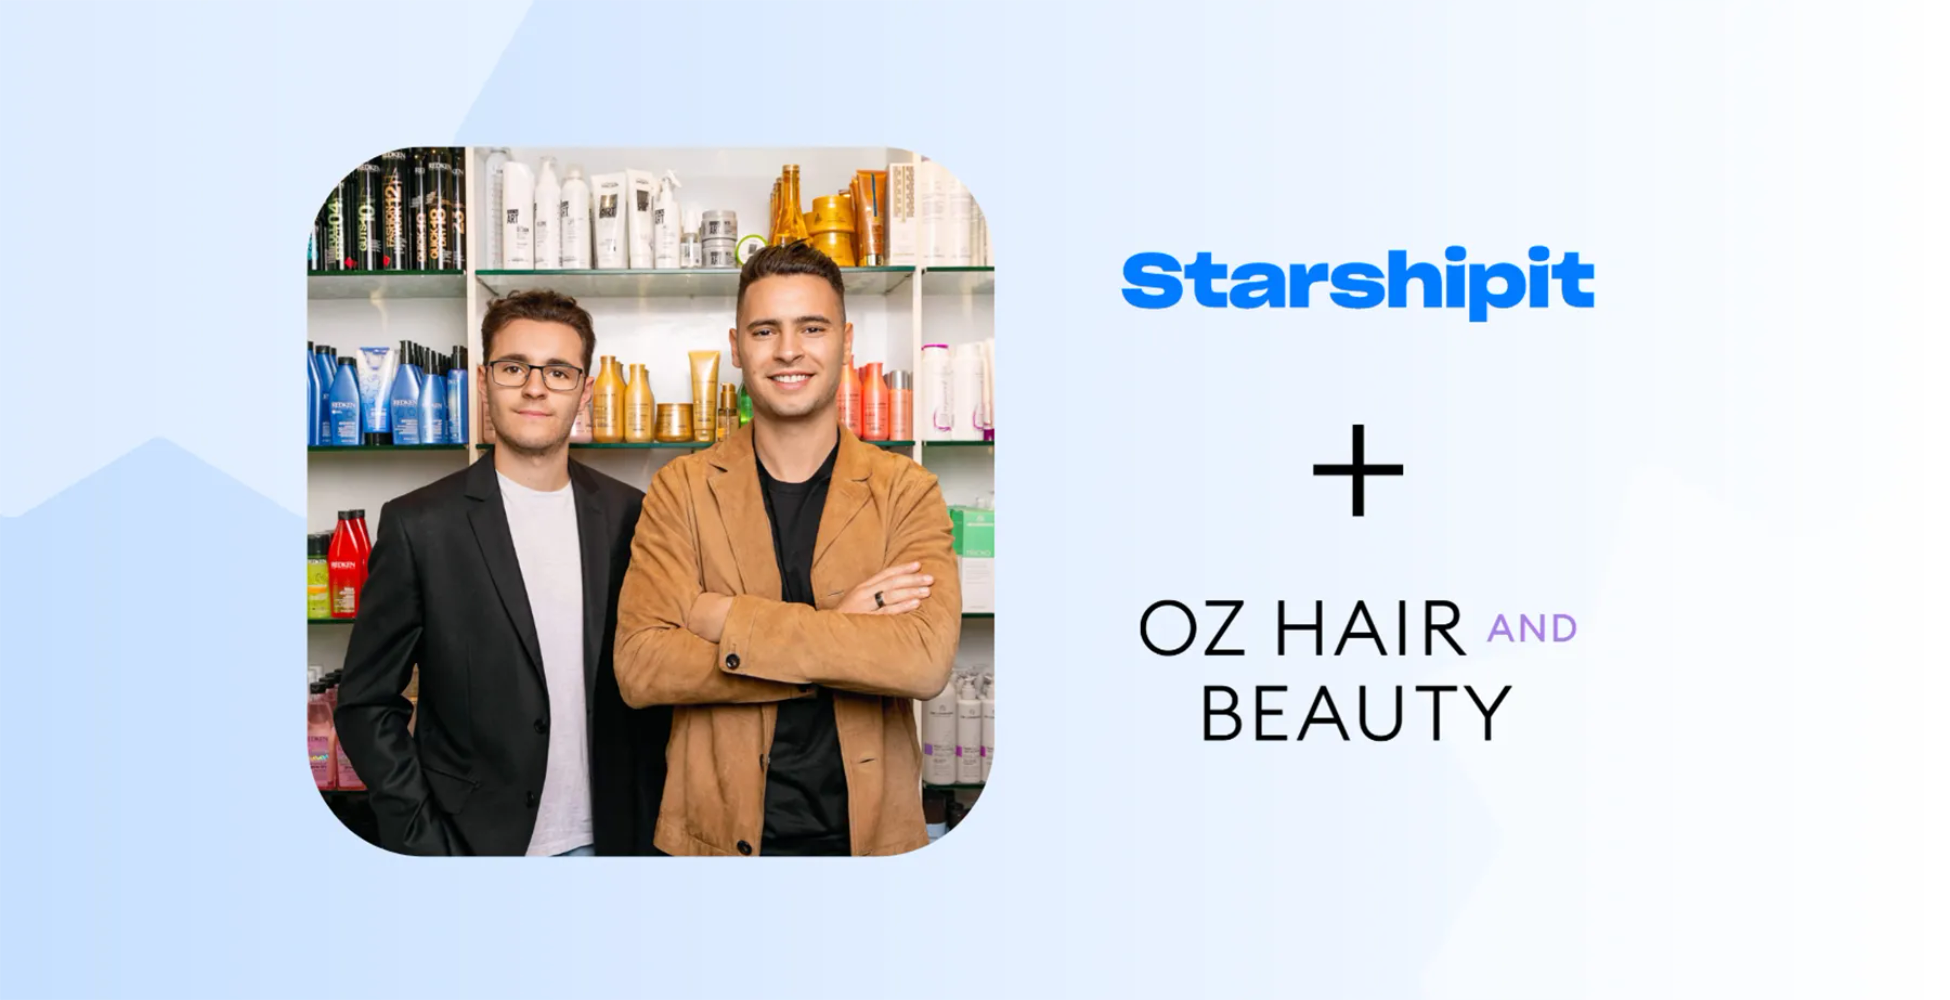 Starshipit and Oz Hair and Beauty case study